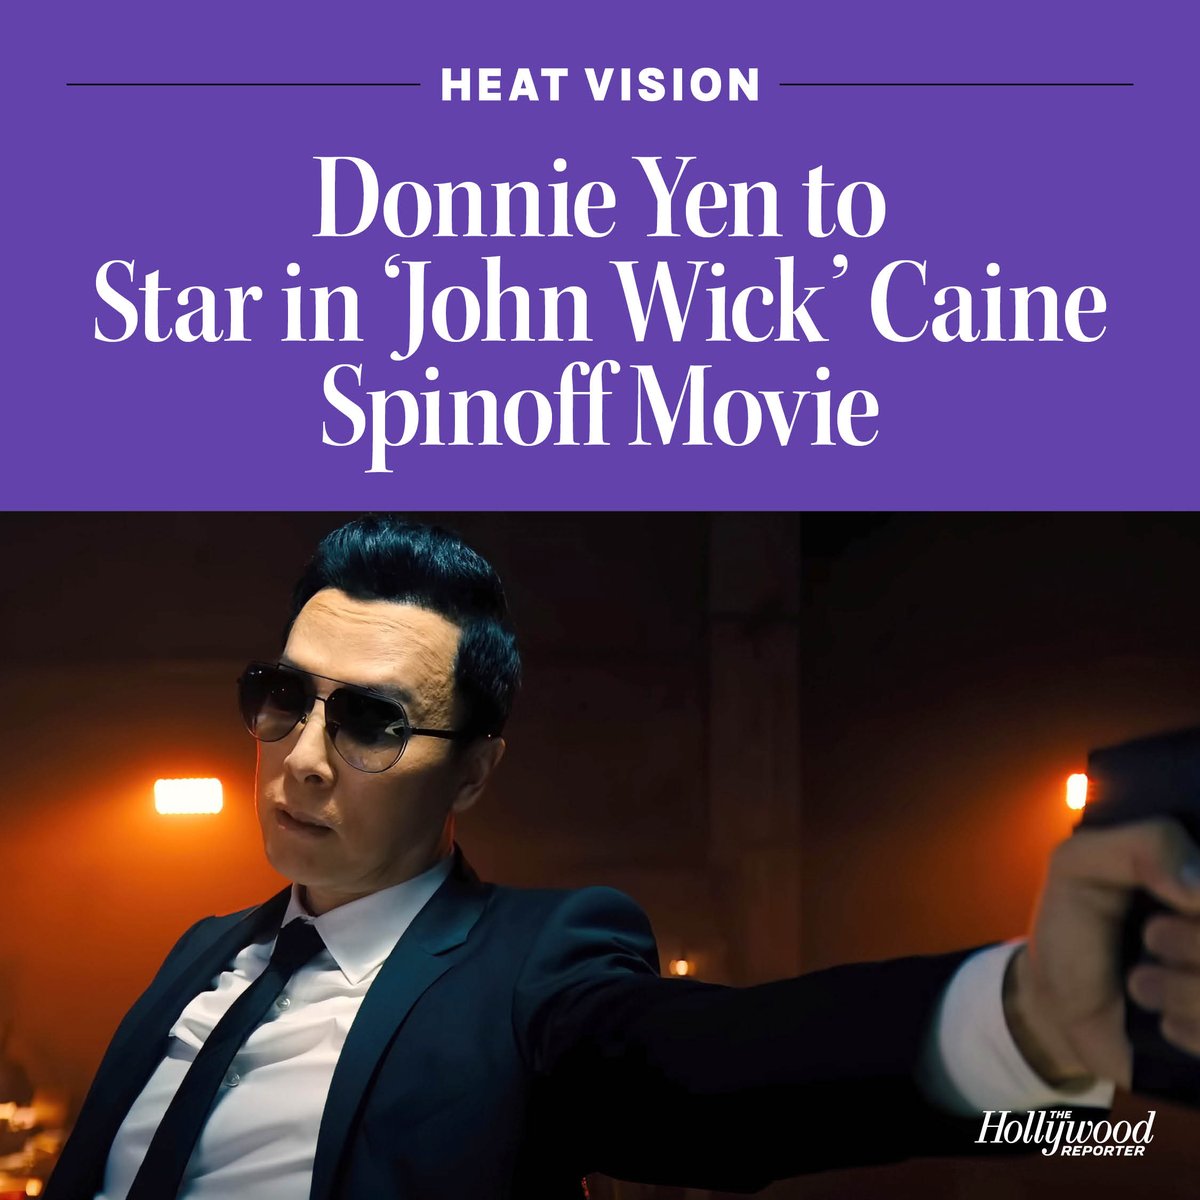 Lionsgate is developing a #JohnWick spinoff movie around Donnie Yen’s Caine assassin character from 'Chapter 4.' The film is set to shoot in Hong Kong in 2025: thr.cm/1lxMuHO